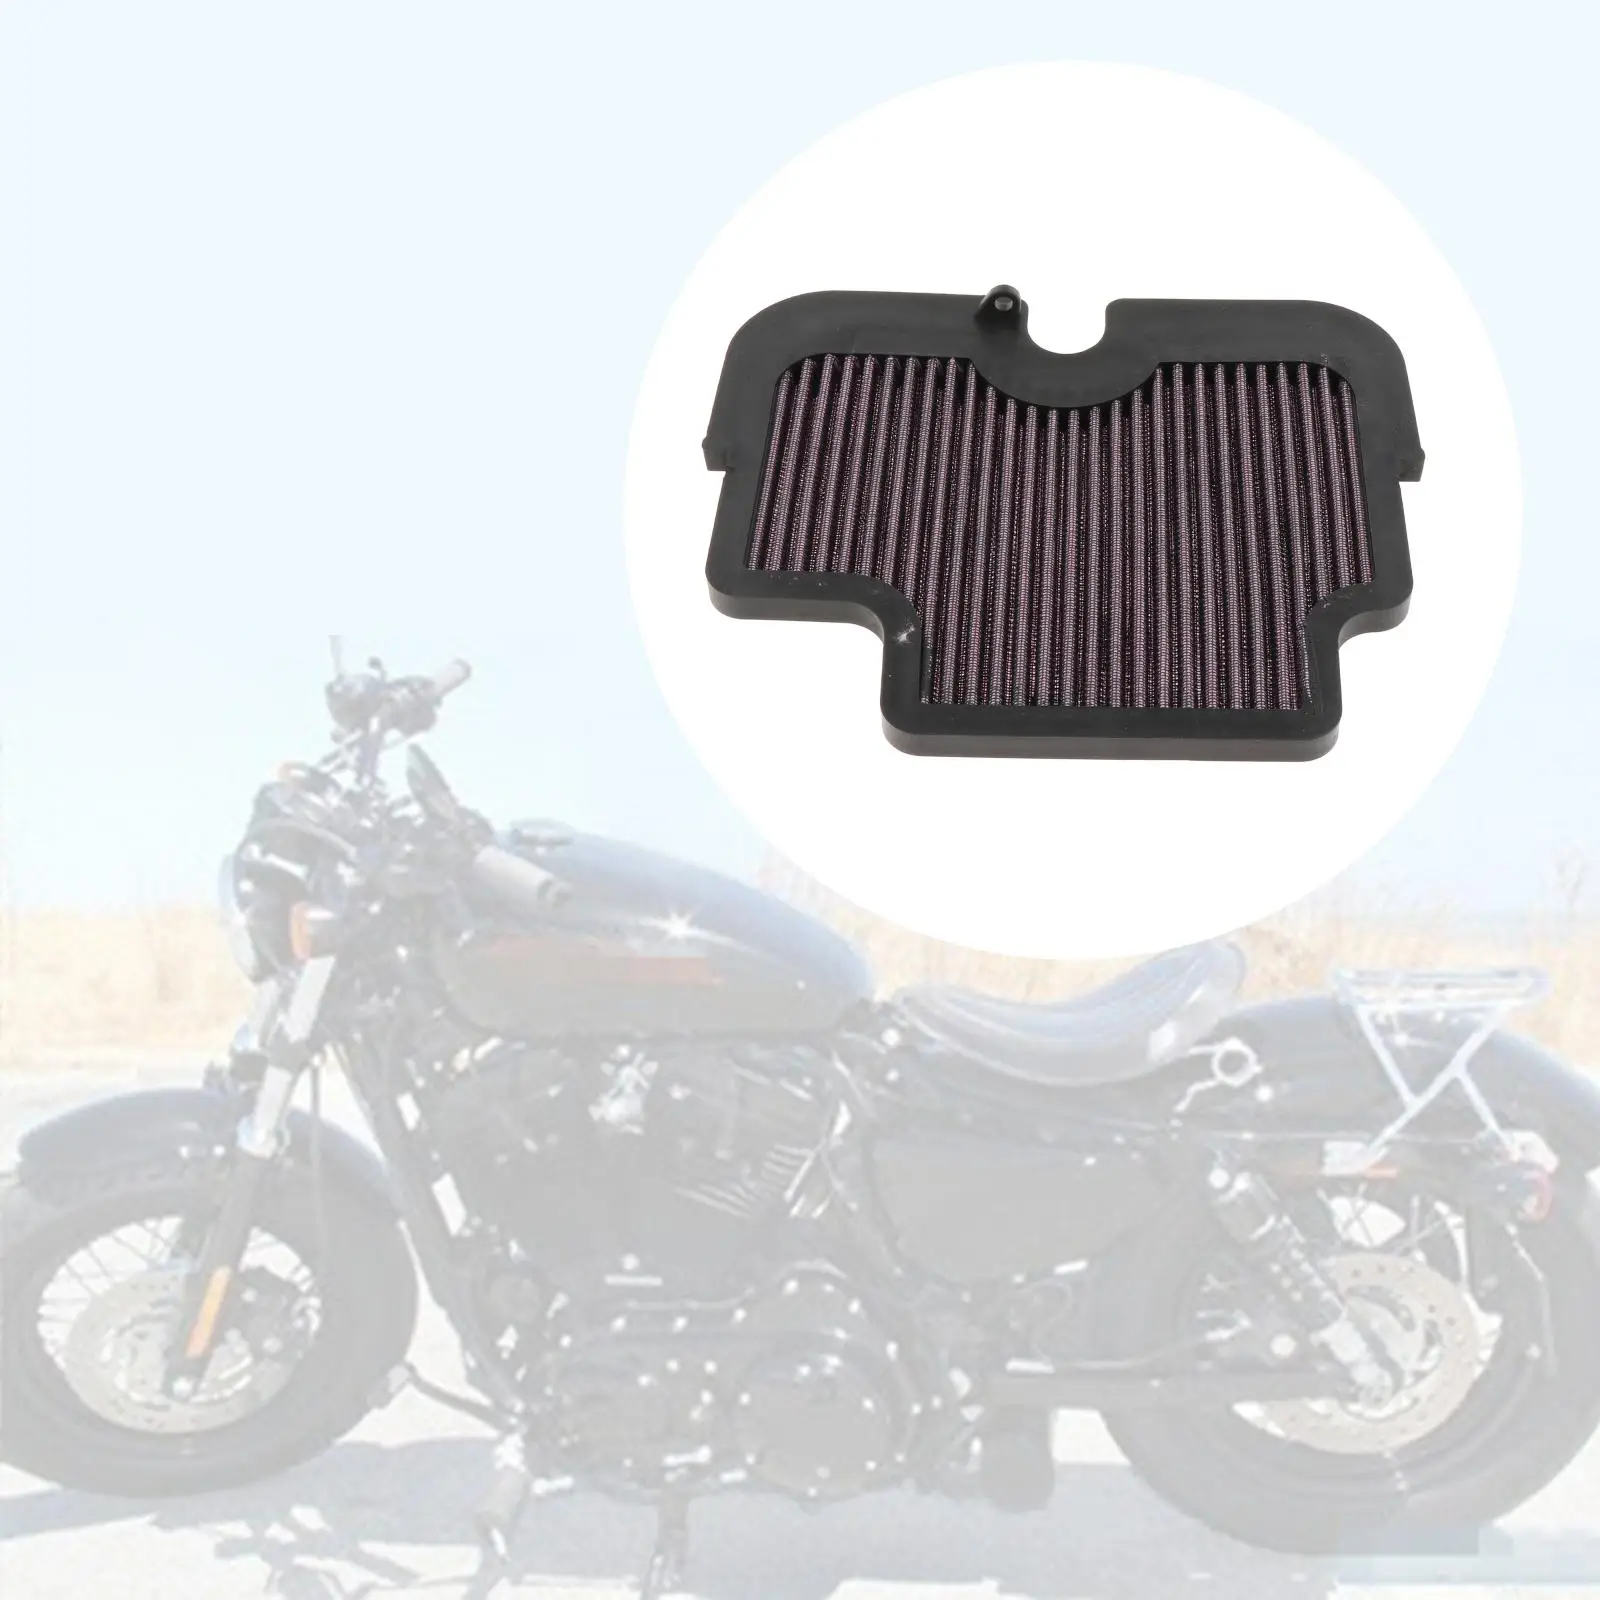 High Performance Air Filter Element Compatible for Kawasaki ER6N 2006-2011 Engine